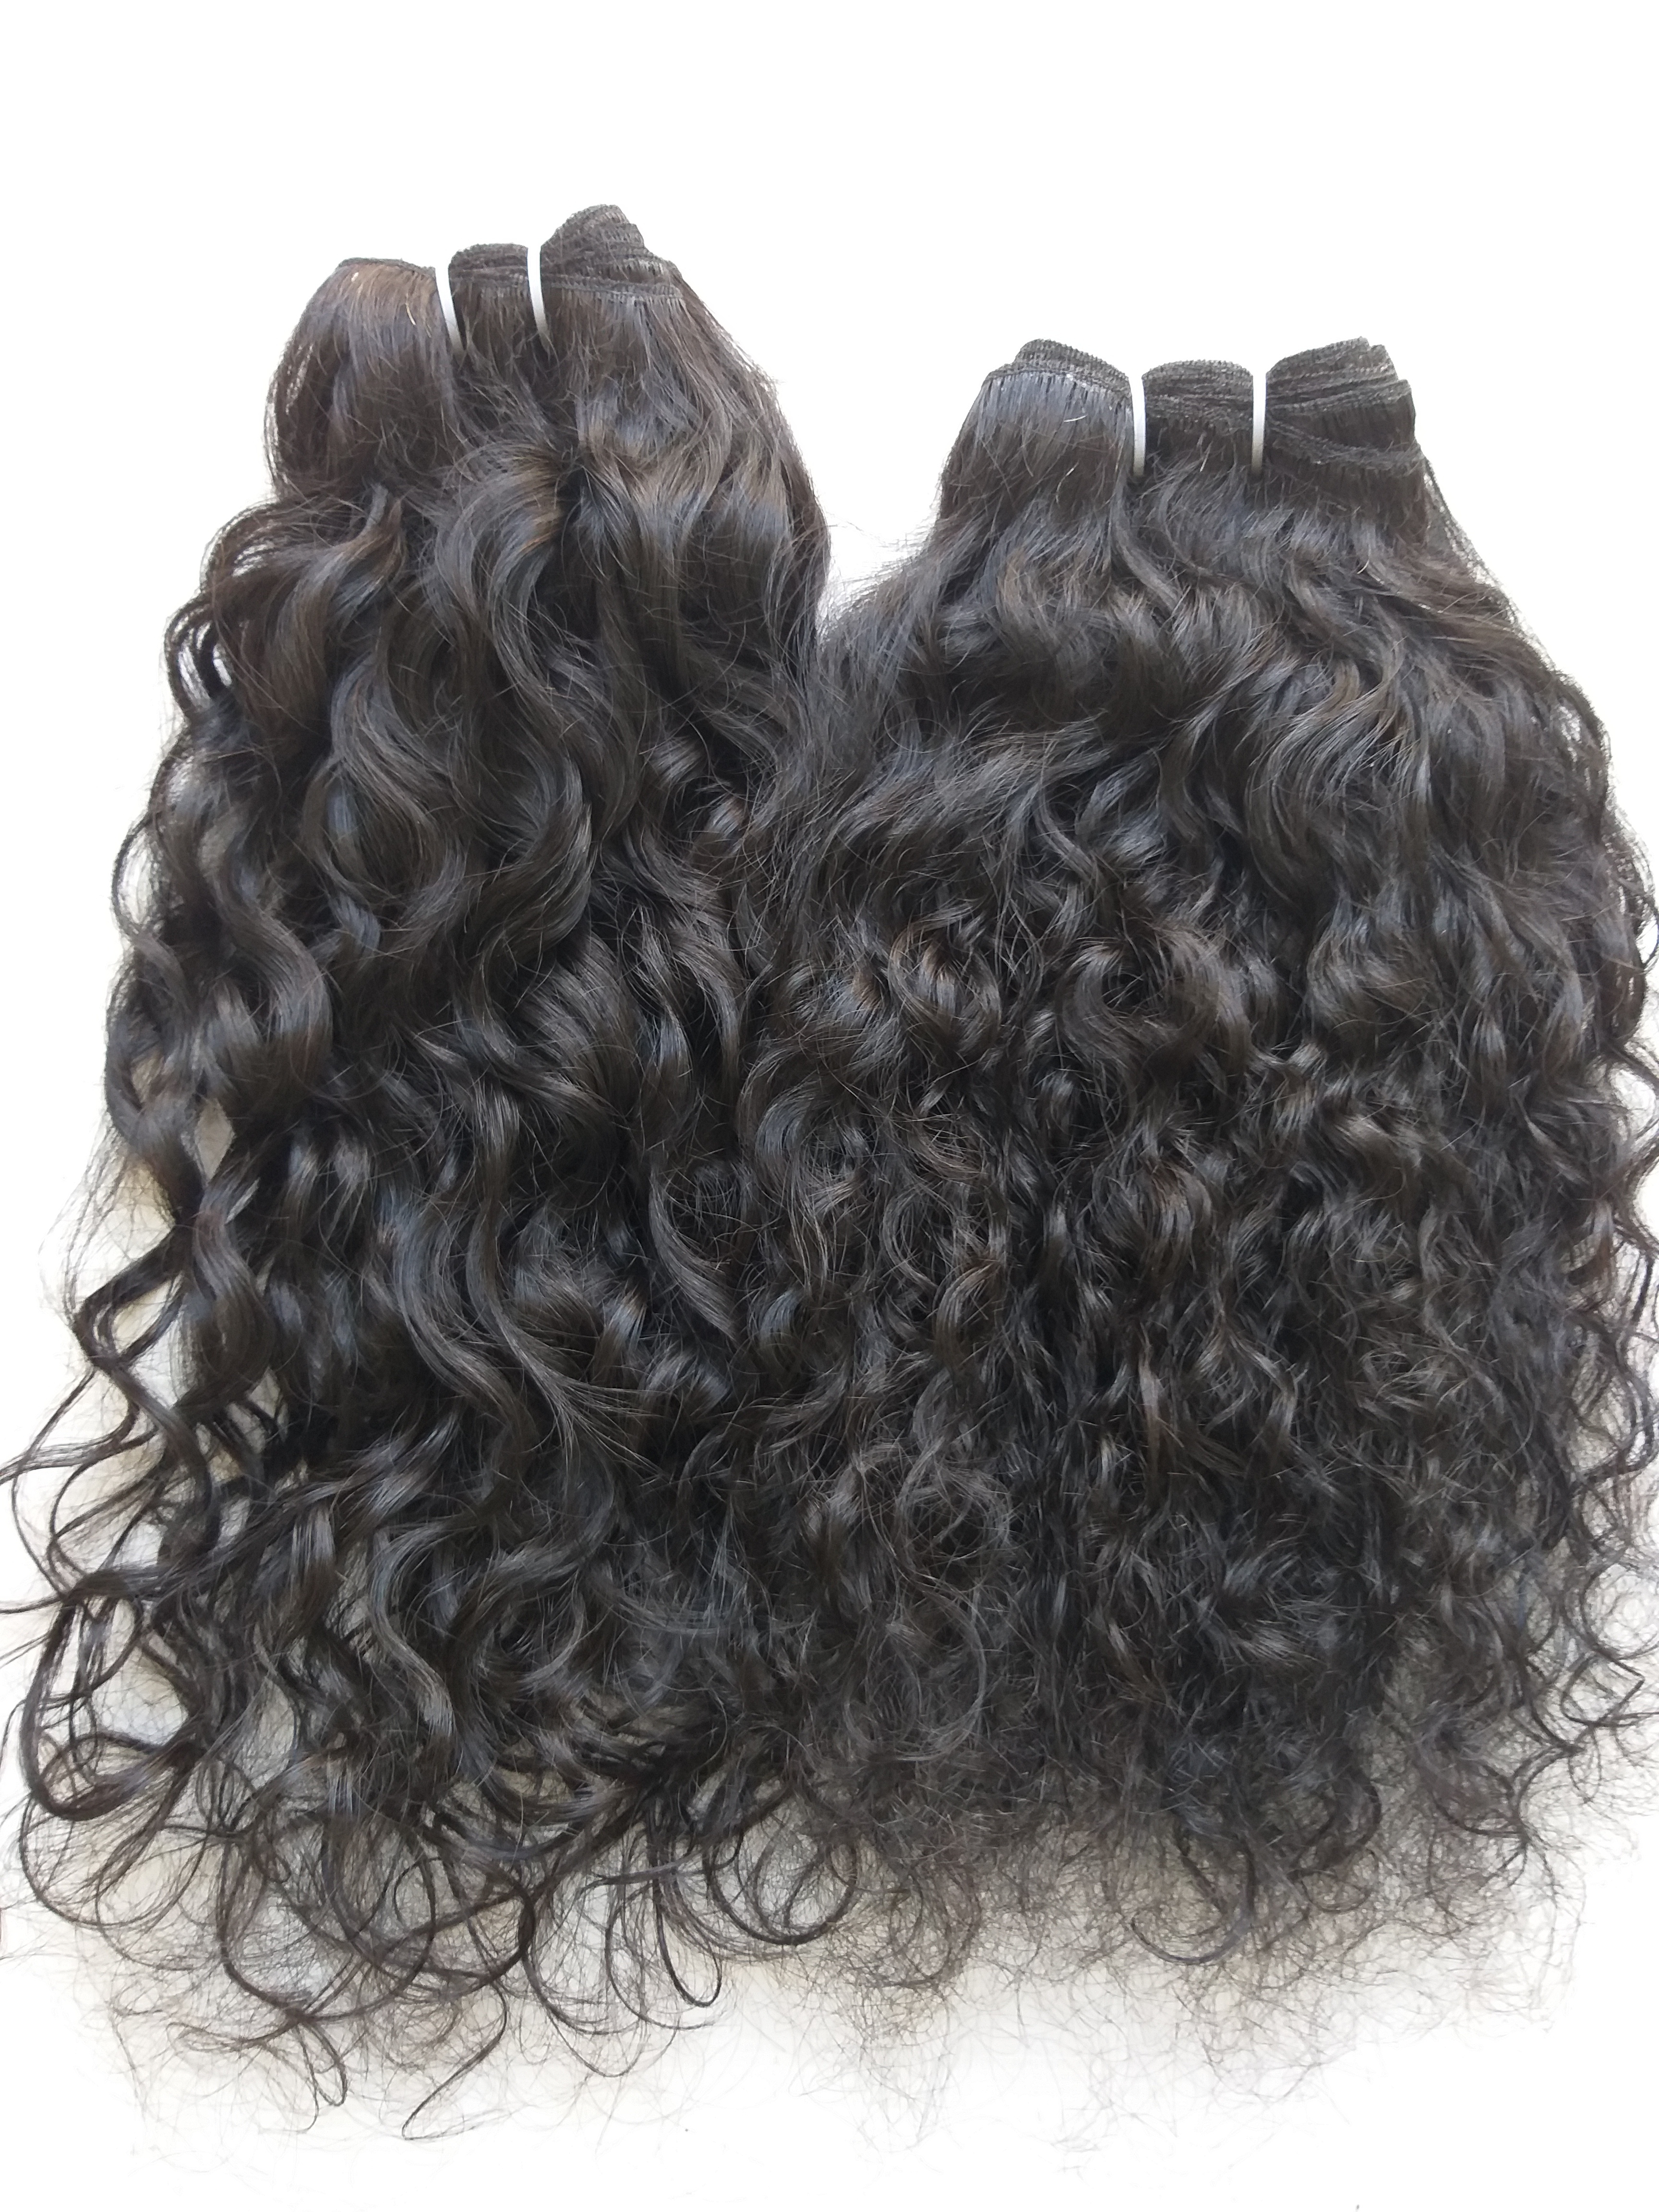 Premium Curly Human Hair Extensions best hair extension